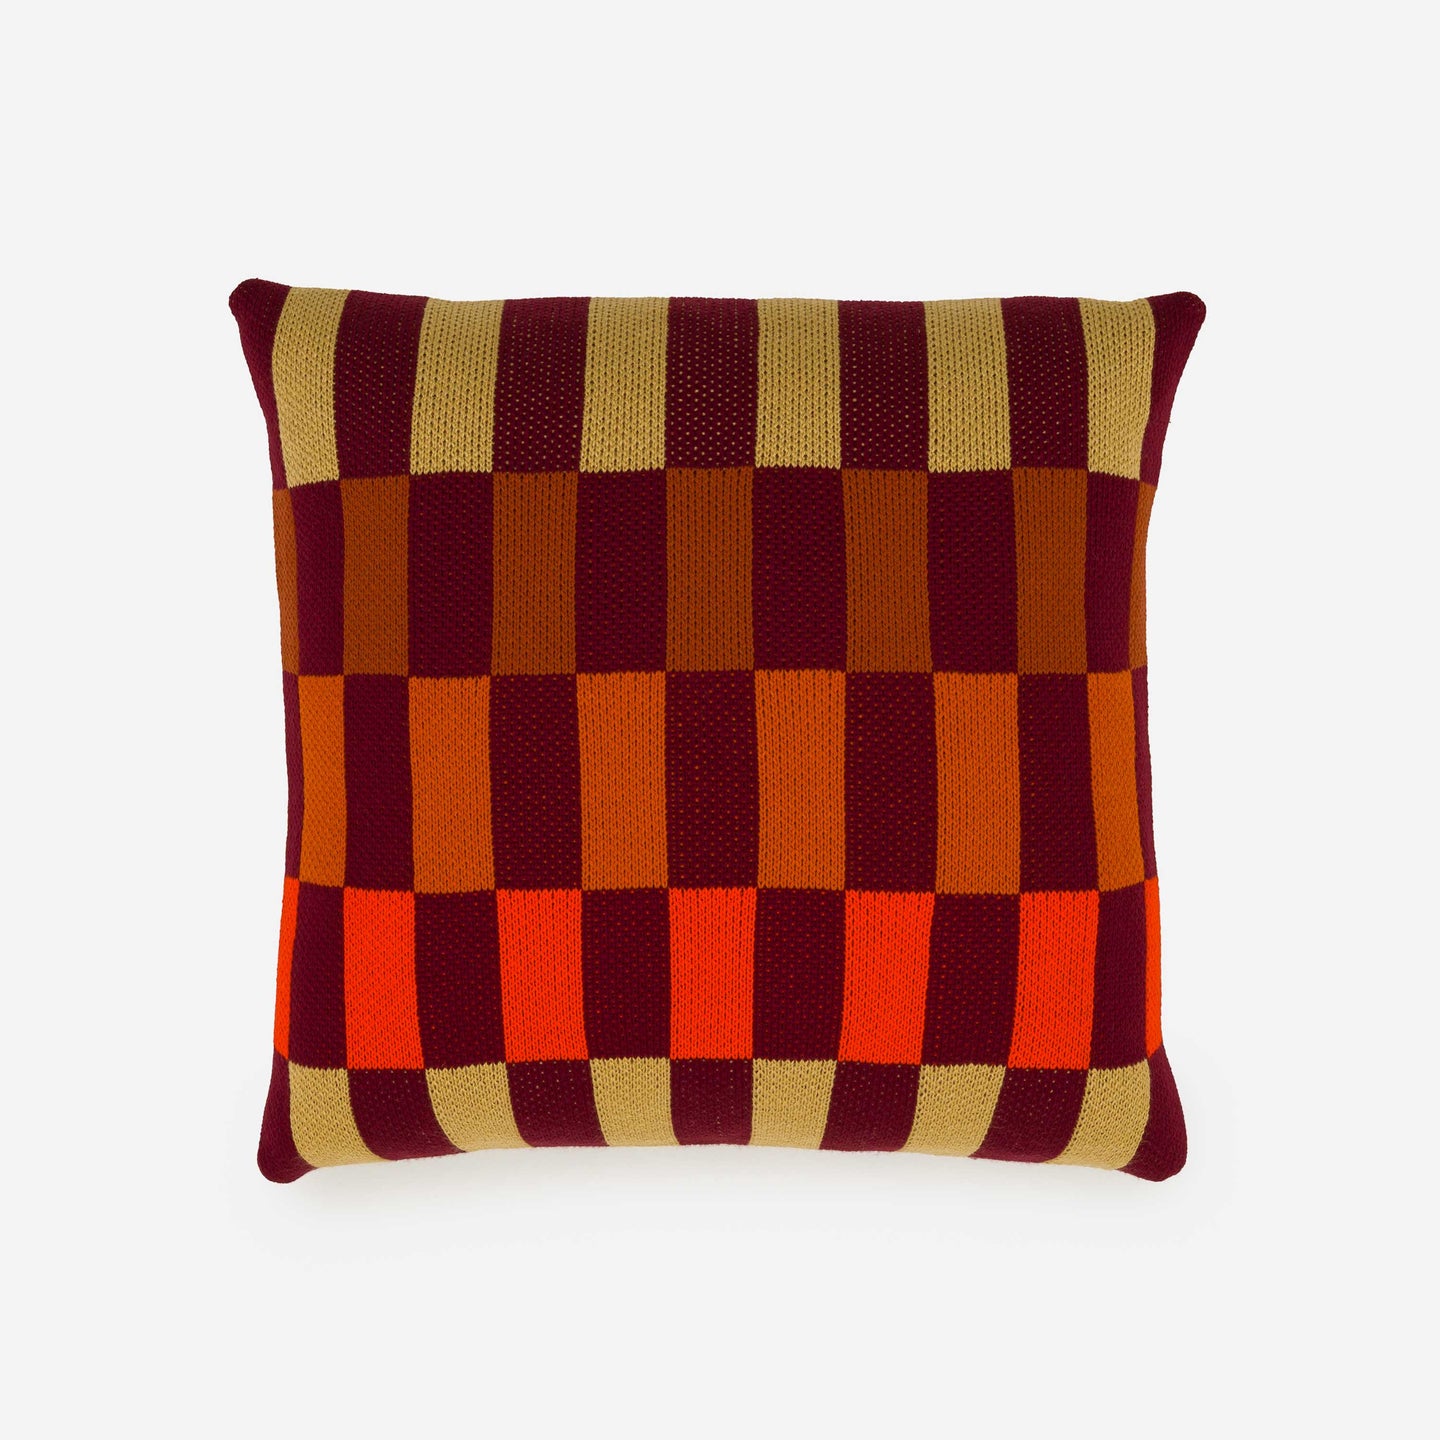 knit pillow cover with checkerboard design using dark tone colors